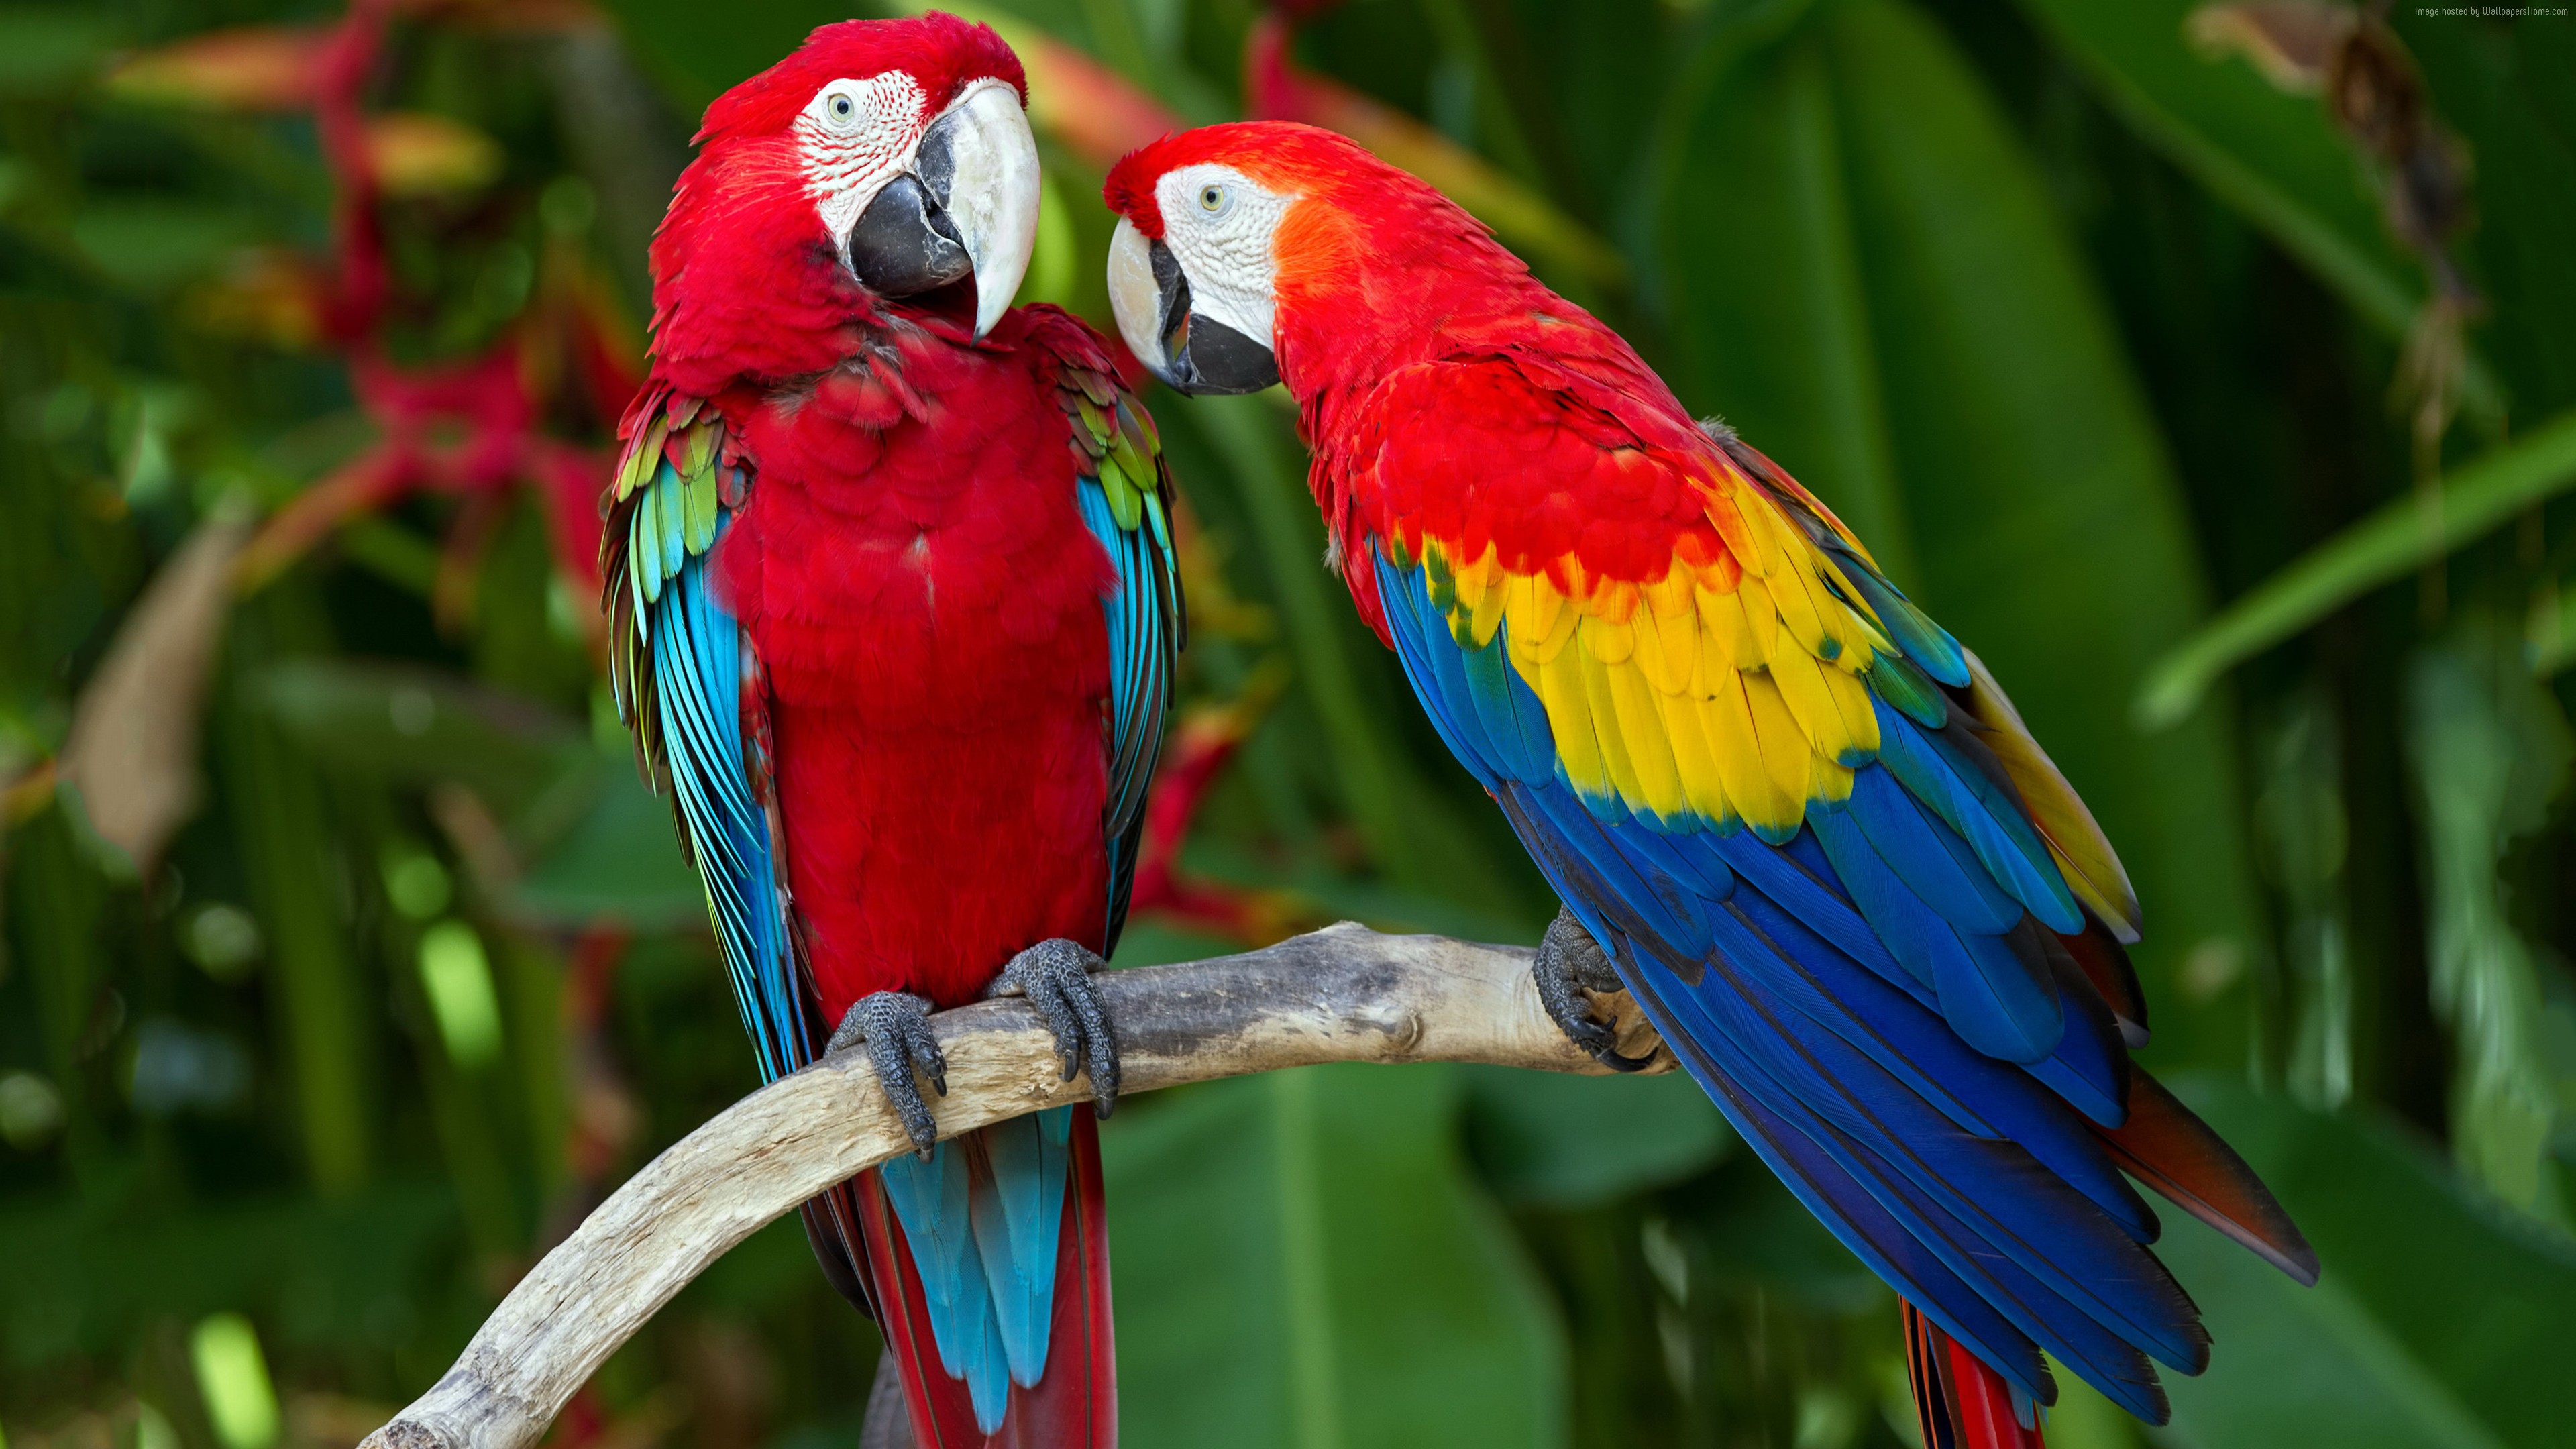 Scarlet Macaw Colorful Parrots Exotic Tropical Birds Red Blue And Yellow  Feathers Hd Wallpapers Ultra Hd 4k Wallpapers For Desktop & Mobiles :  